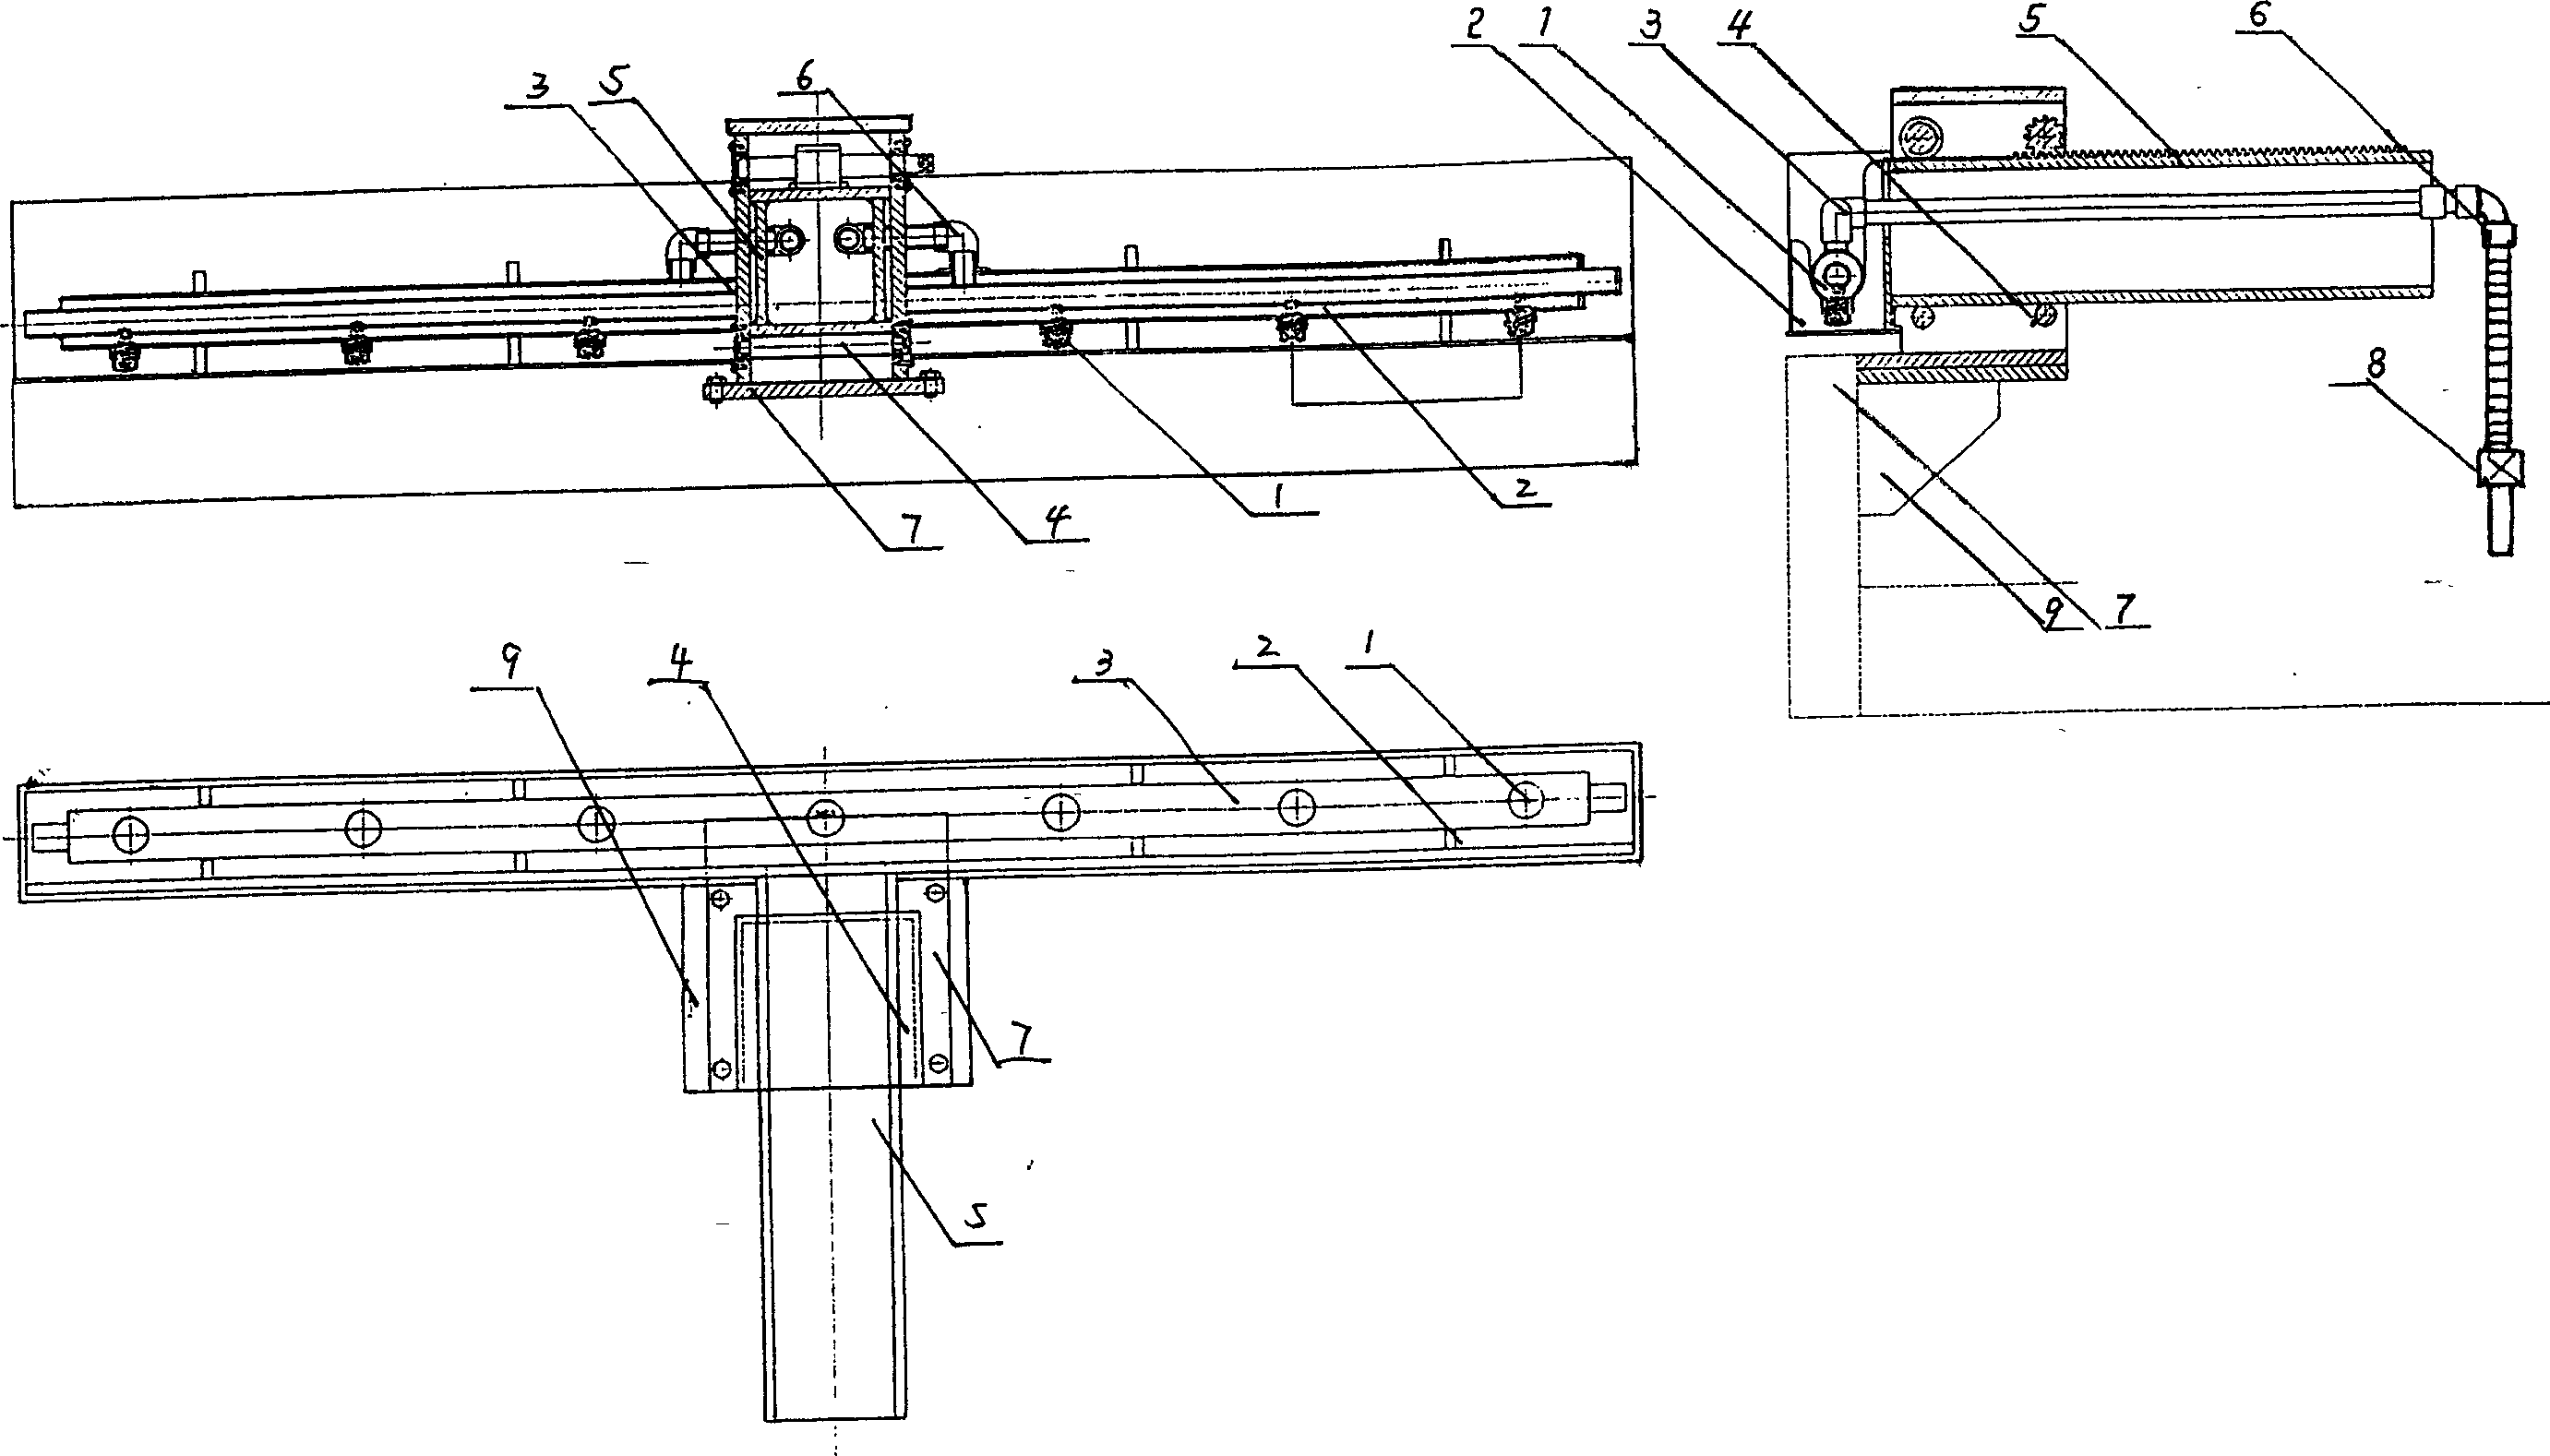 Stelmo line gas spray cooling device and method for high-speed wire rod mill